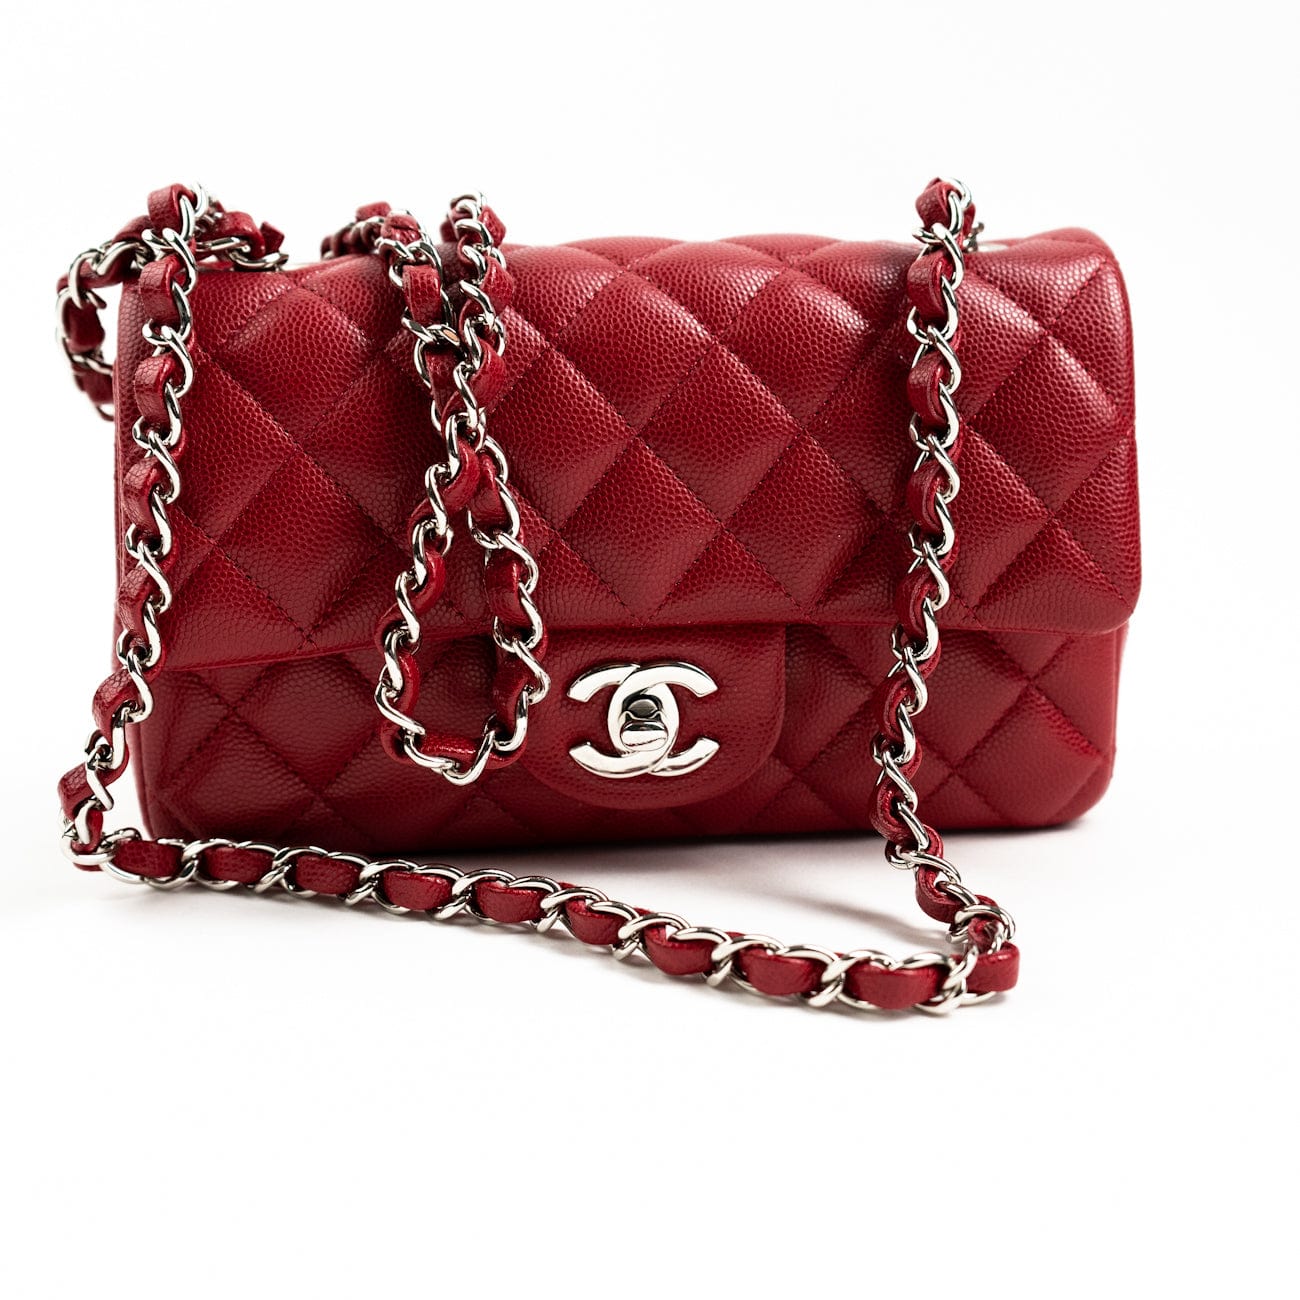 CHANEL Handbag 18B Raspberry Red Caviar Quilted Mini Rectangular Single Flap with Silver Hardware - Redeluxe